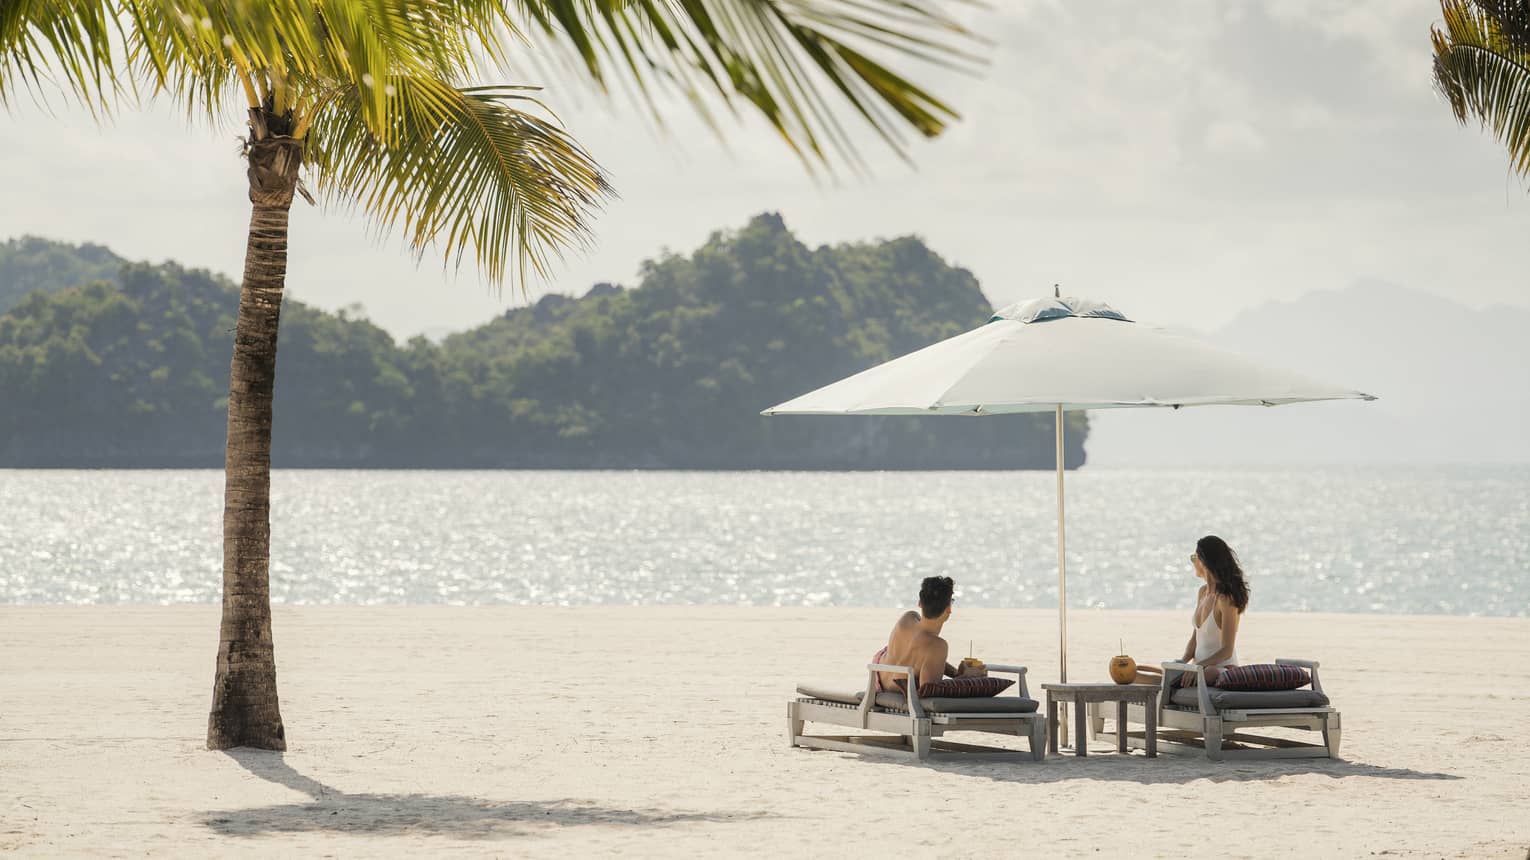 A couple on lounge chairs on a white-sand beach, white umbrella, looking out to water, large palm tree